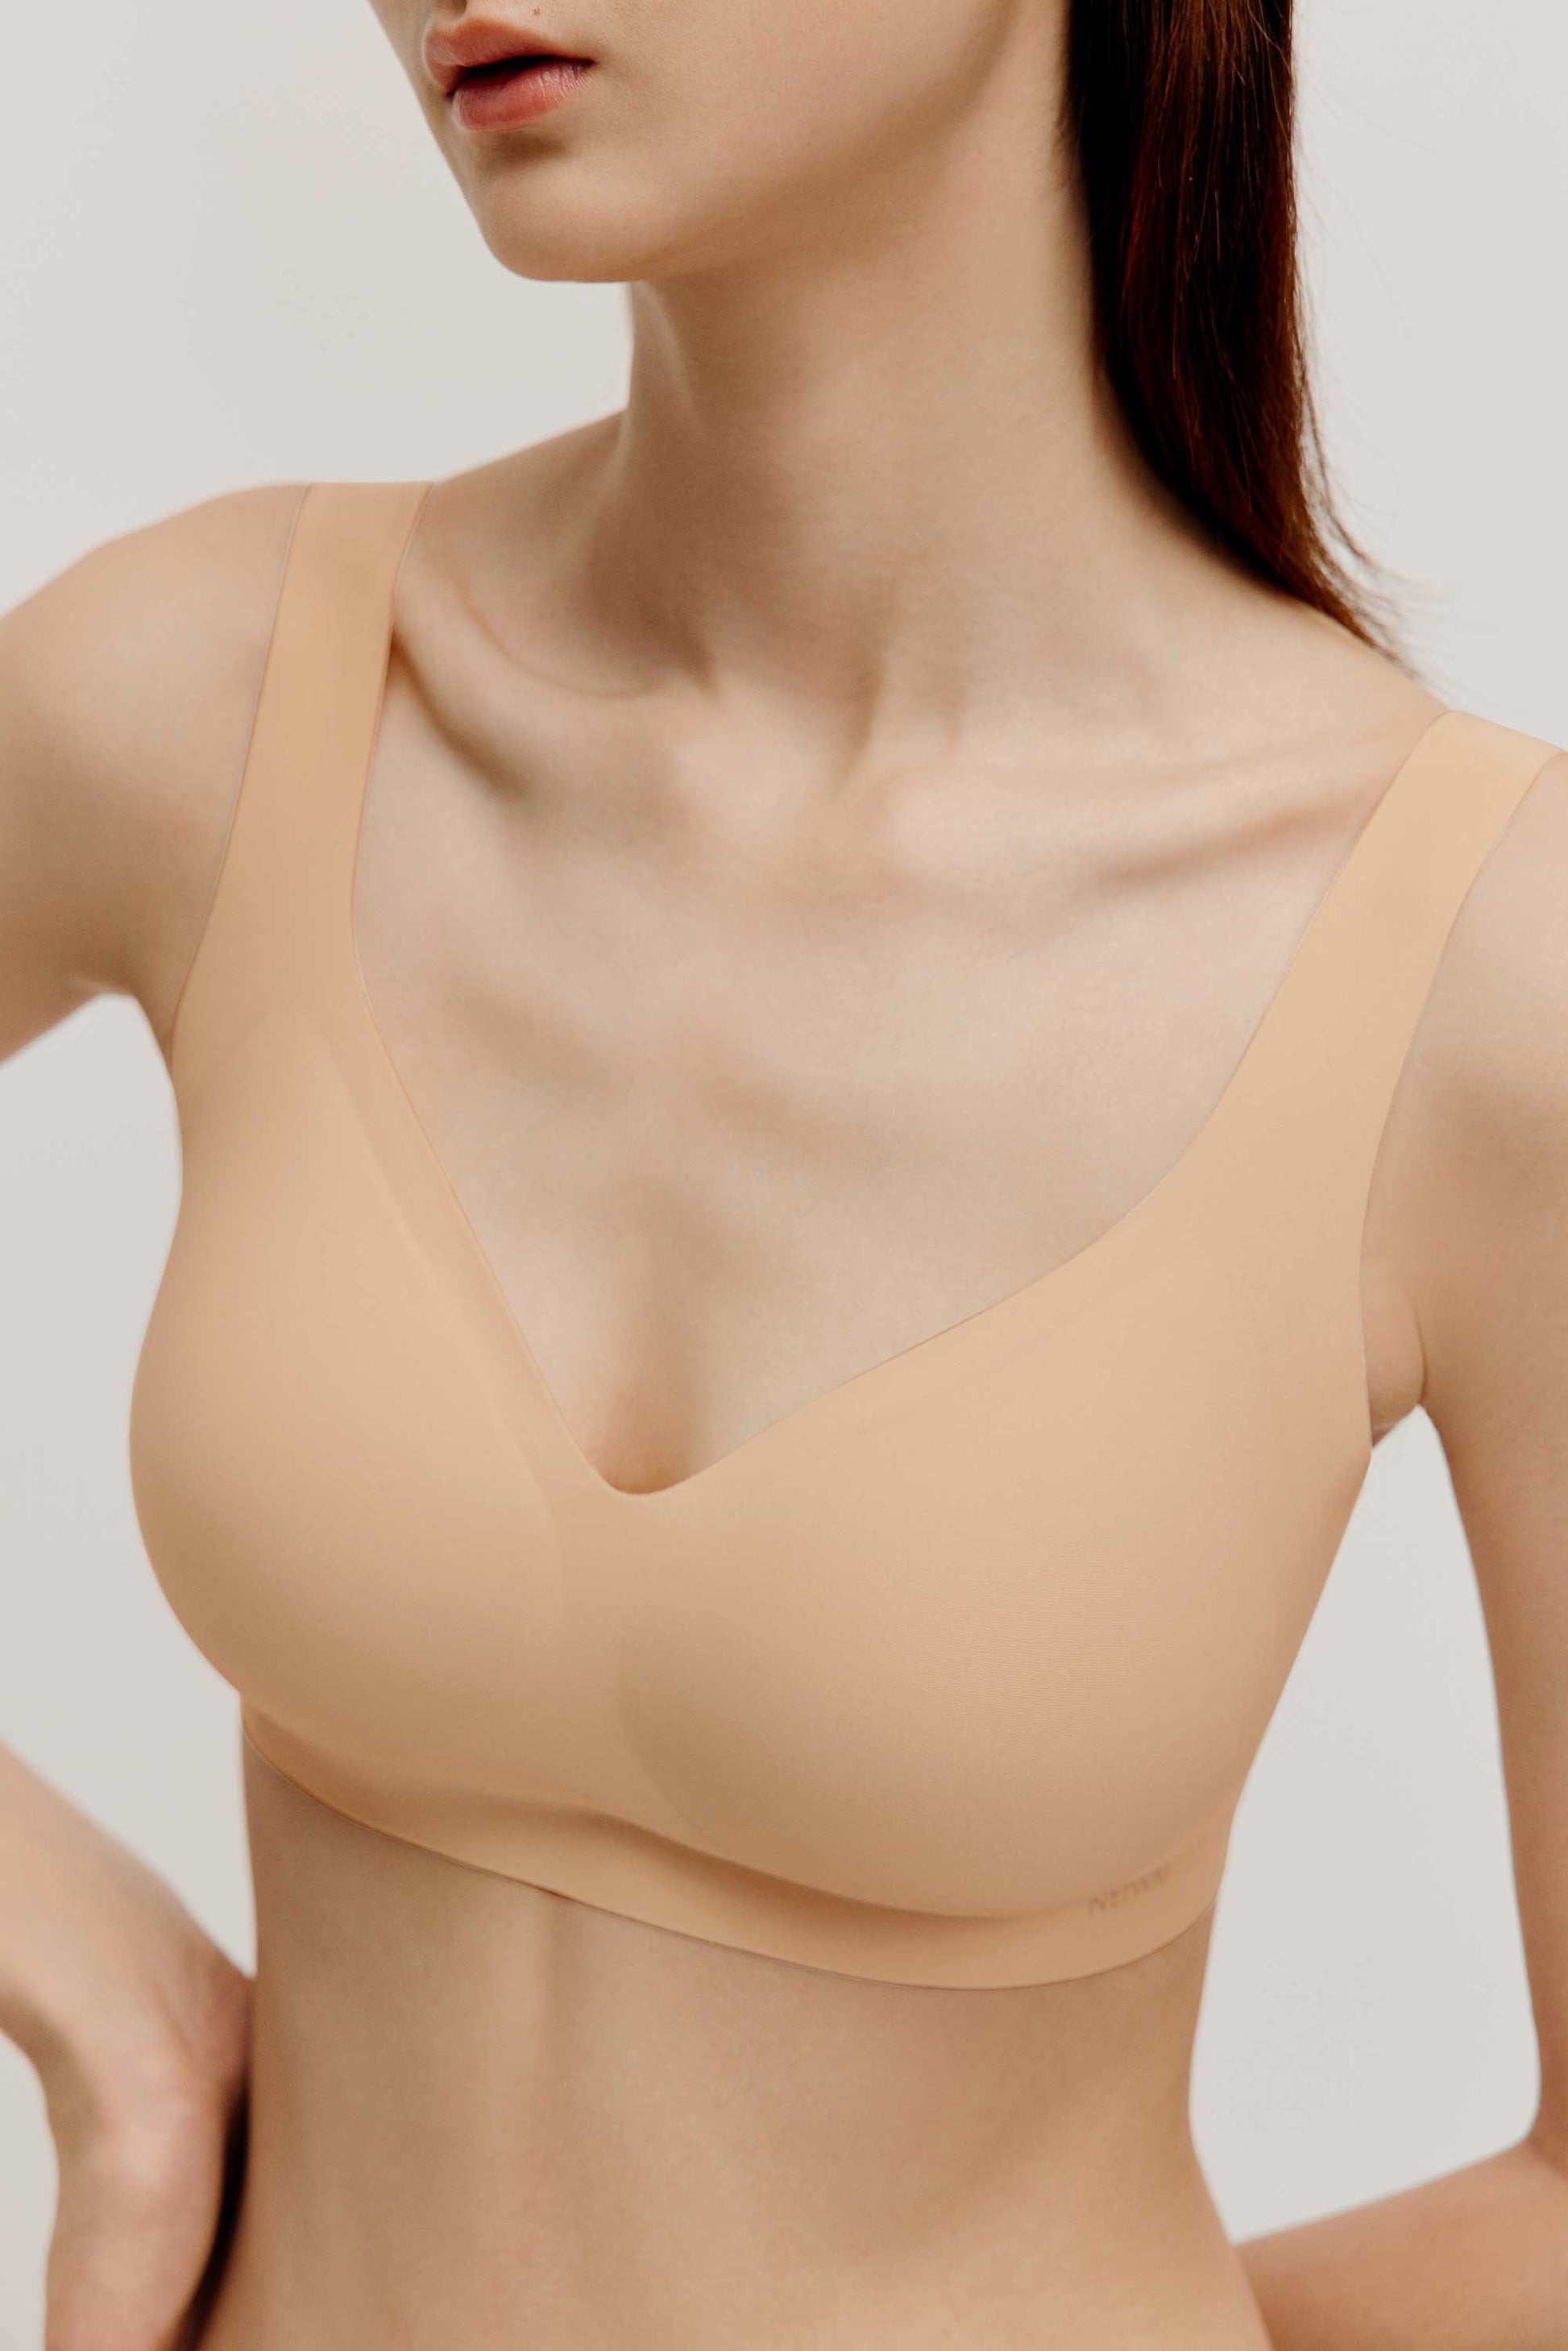 These 'Cloud-Like' Neiwai Wireless Bras Are on Sale with This Promo Code